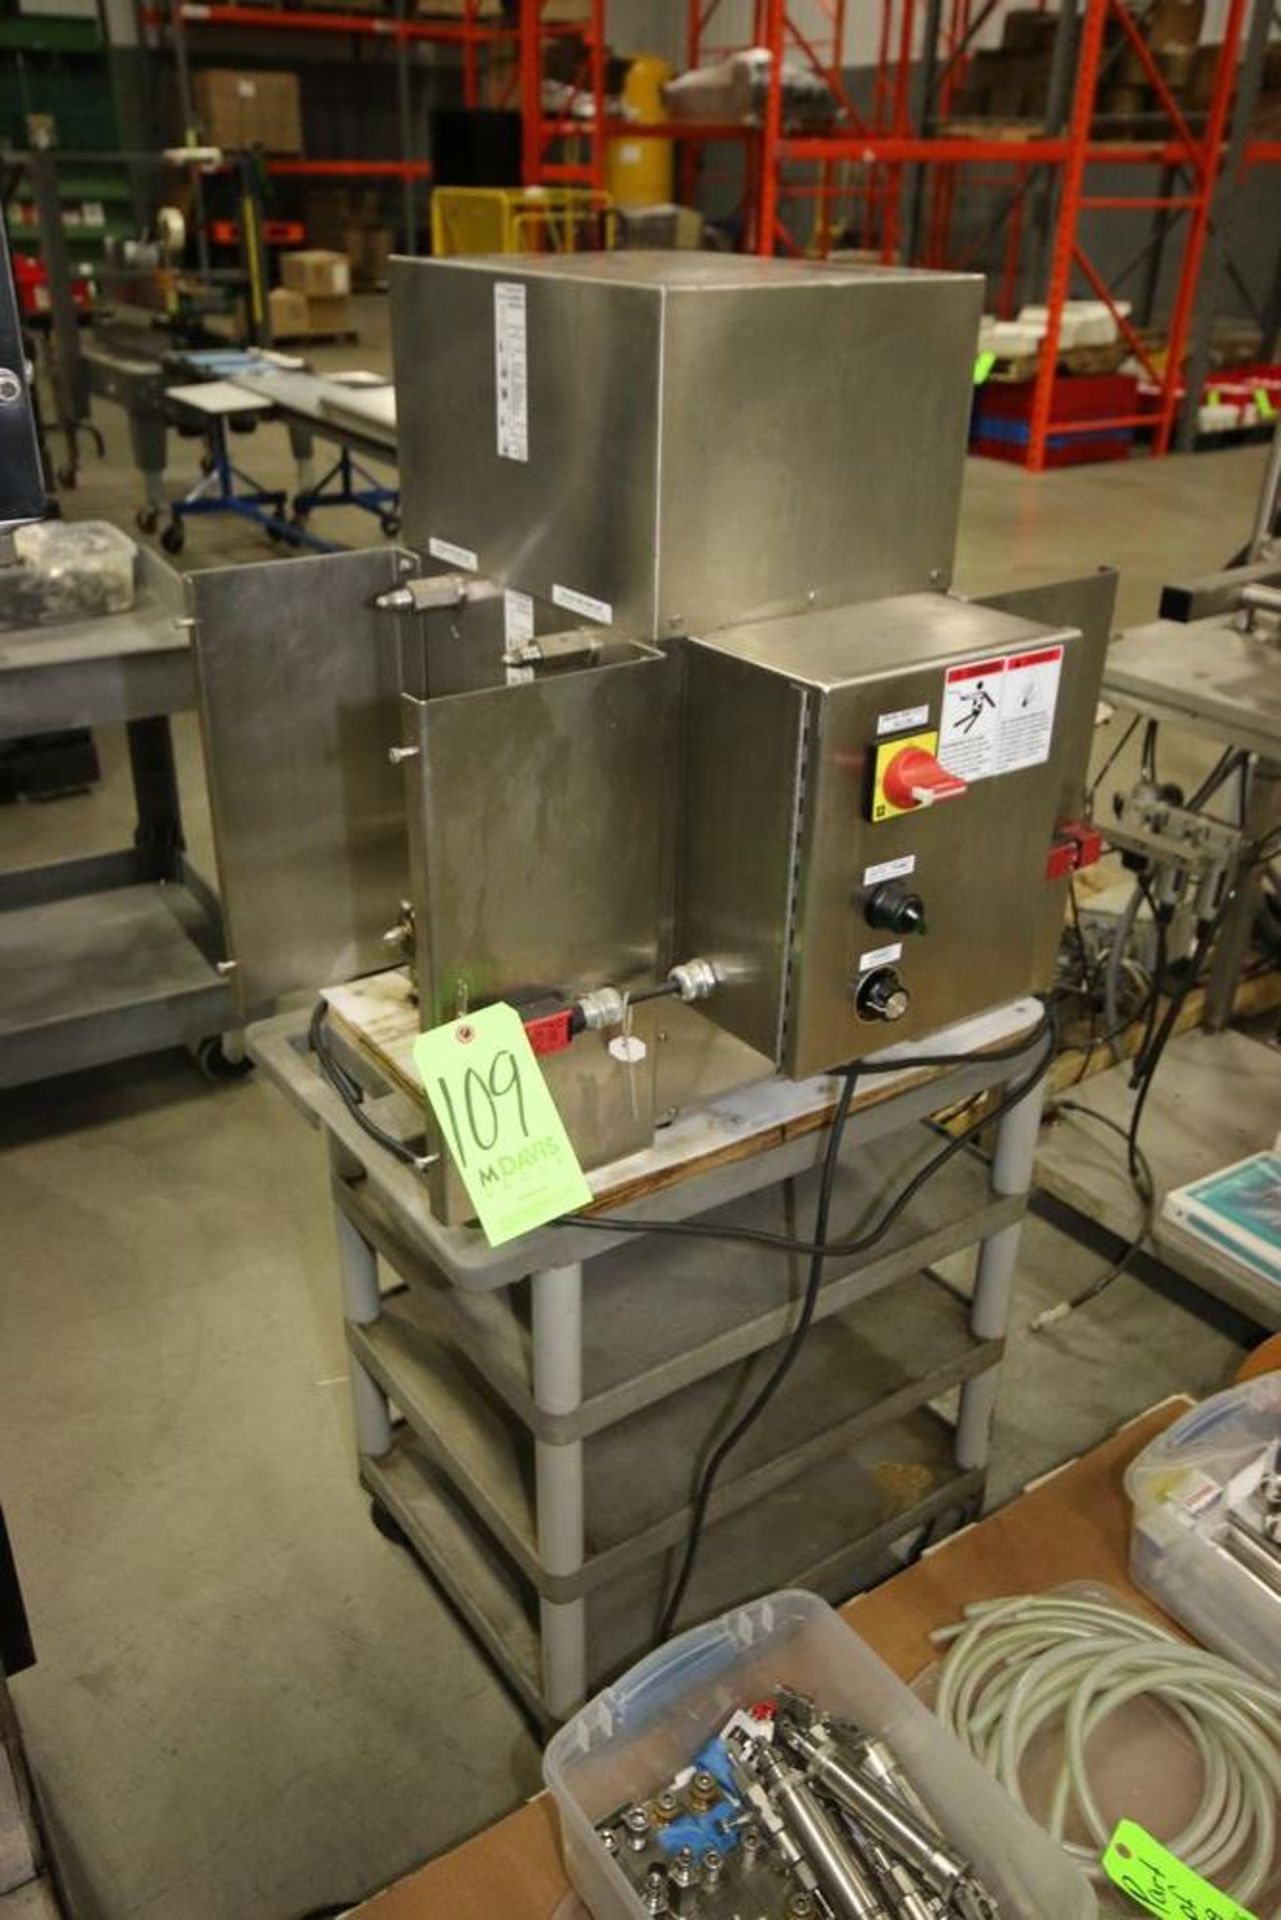 Filamatic Liquid Filling Machine, M/N DAB-8-4, S/N 021238, with Foot Pedal, with Spare Parts - Image 3 of 7